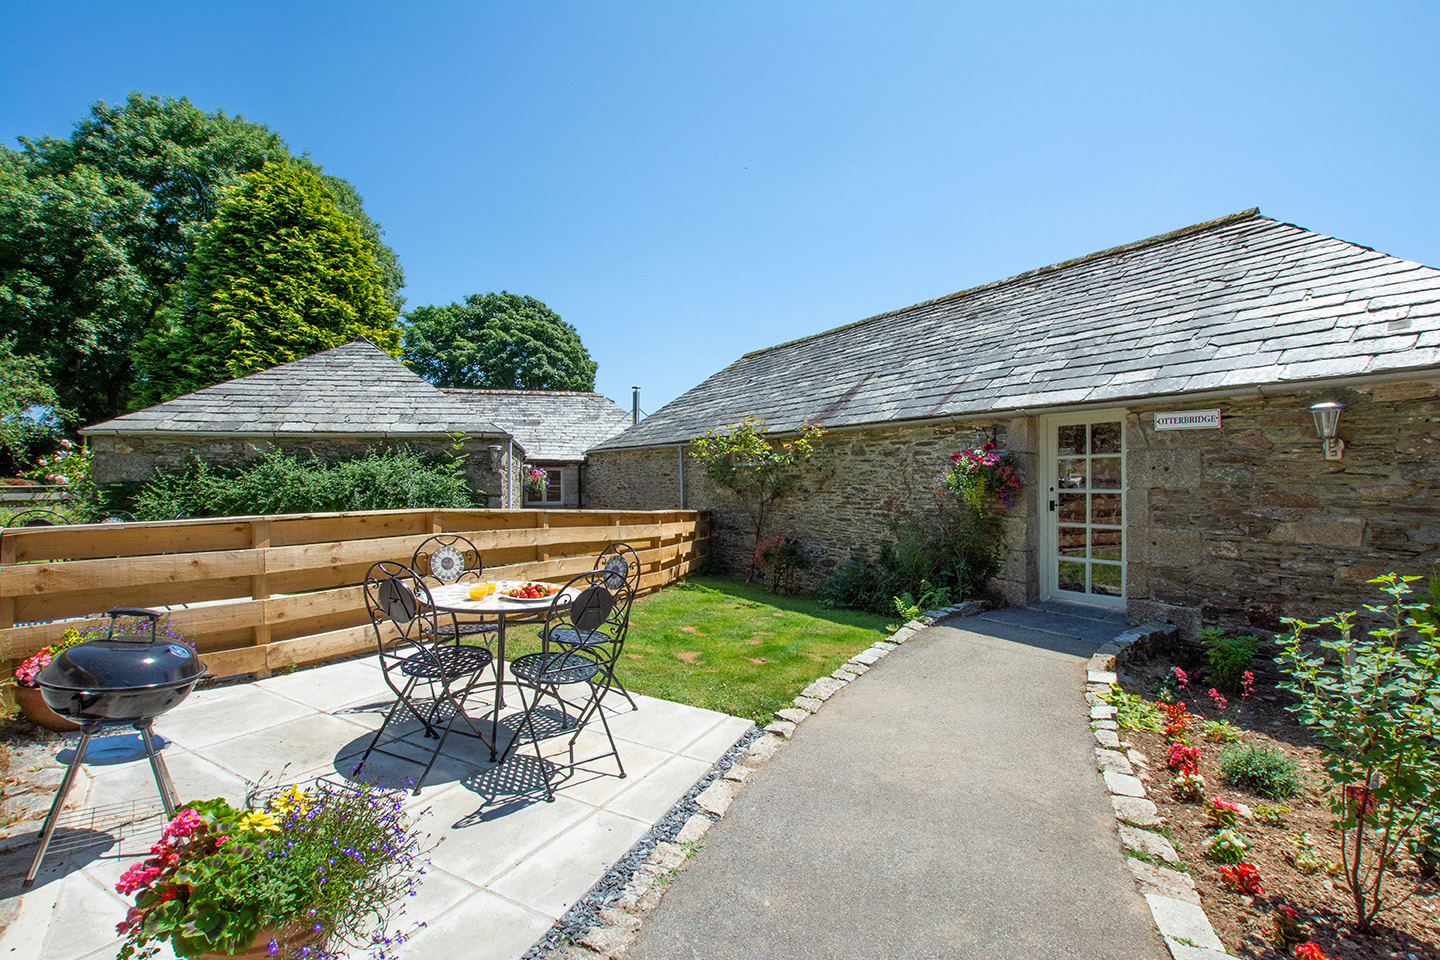 The exterior of Otterbridge luxury self catering converted barn holiday cottage at Penrose Burden in North Cornwall 01.jpg